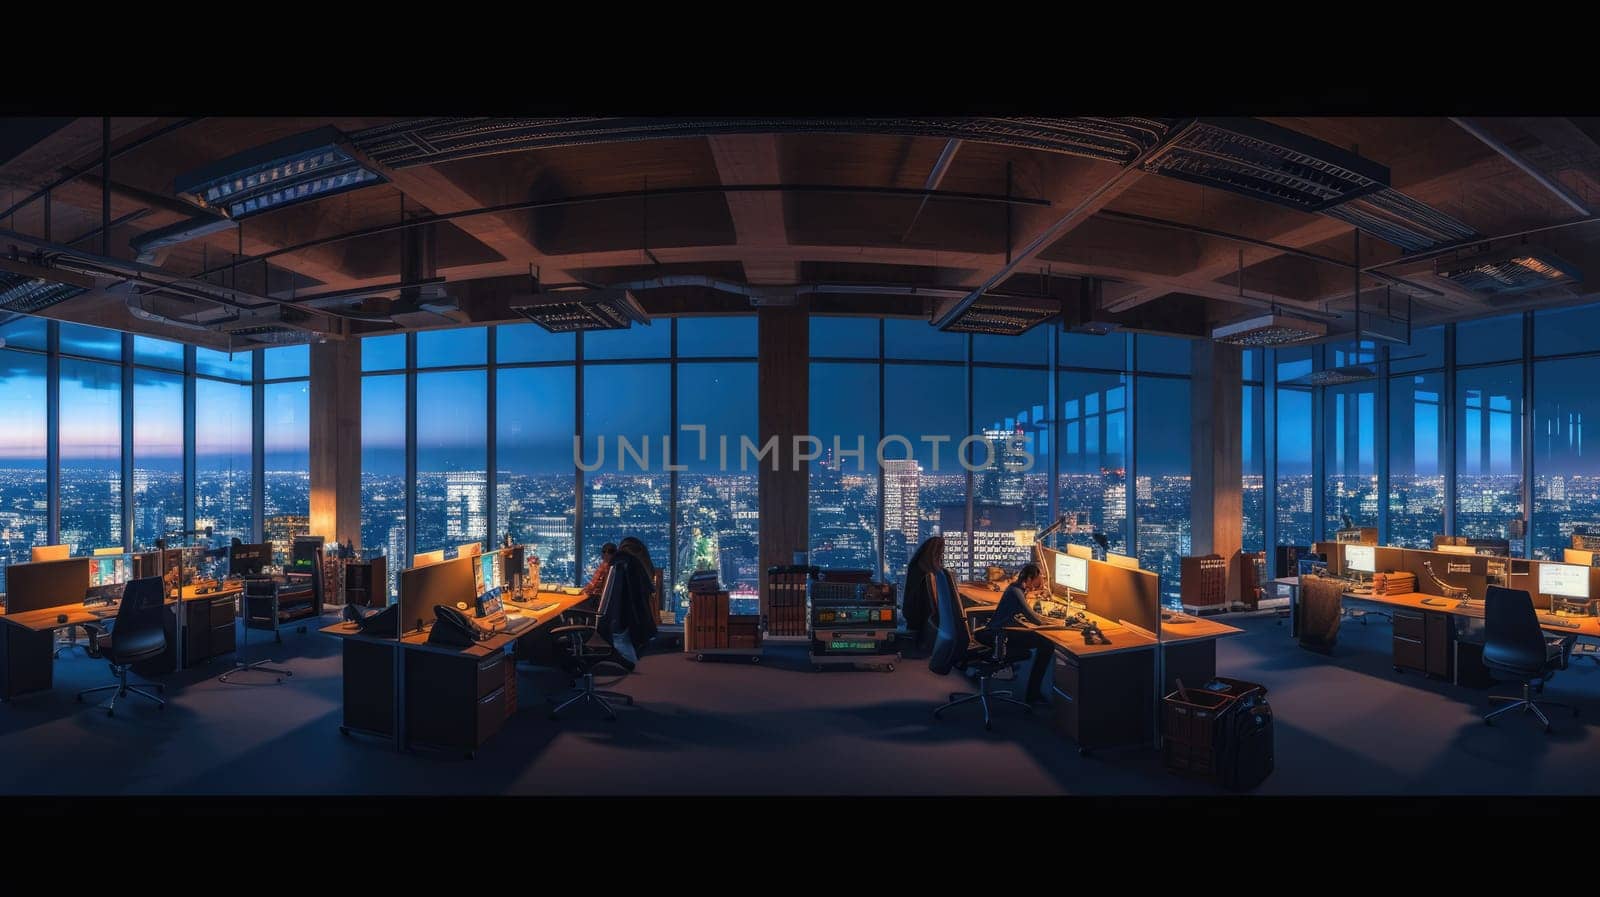 A group of people are sitting at desks in an office at night AIG41 by biancoblue